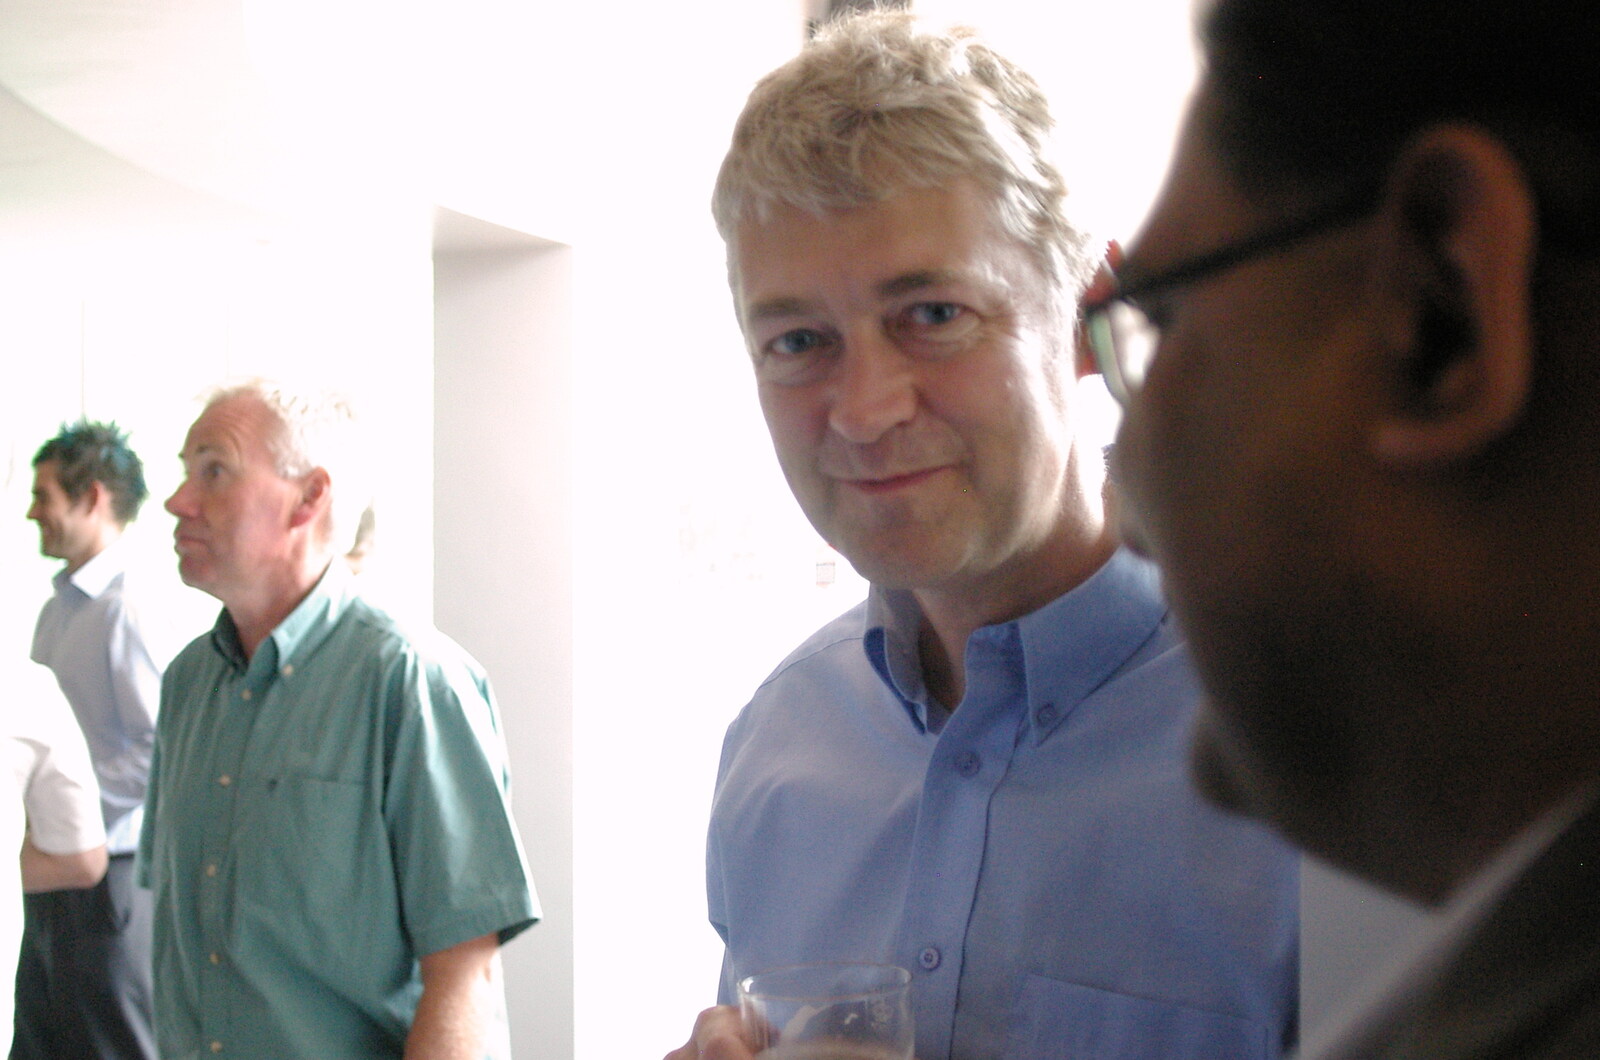 Steve Ives, and Andrew Clarke in the background from Steve Ives' Leaving Lunch, Science Park, Cambridge - 11th July 2005